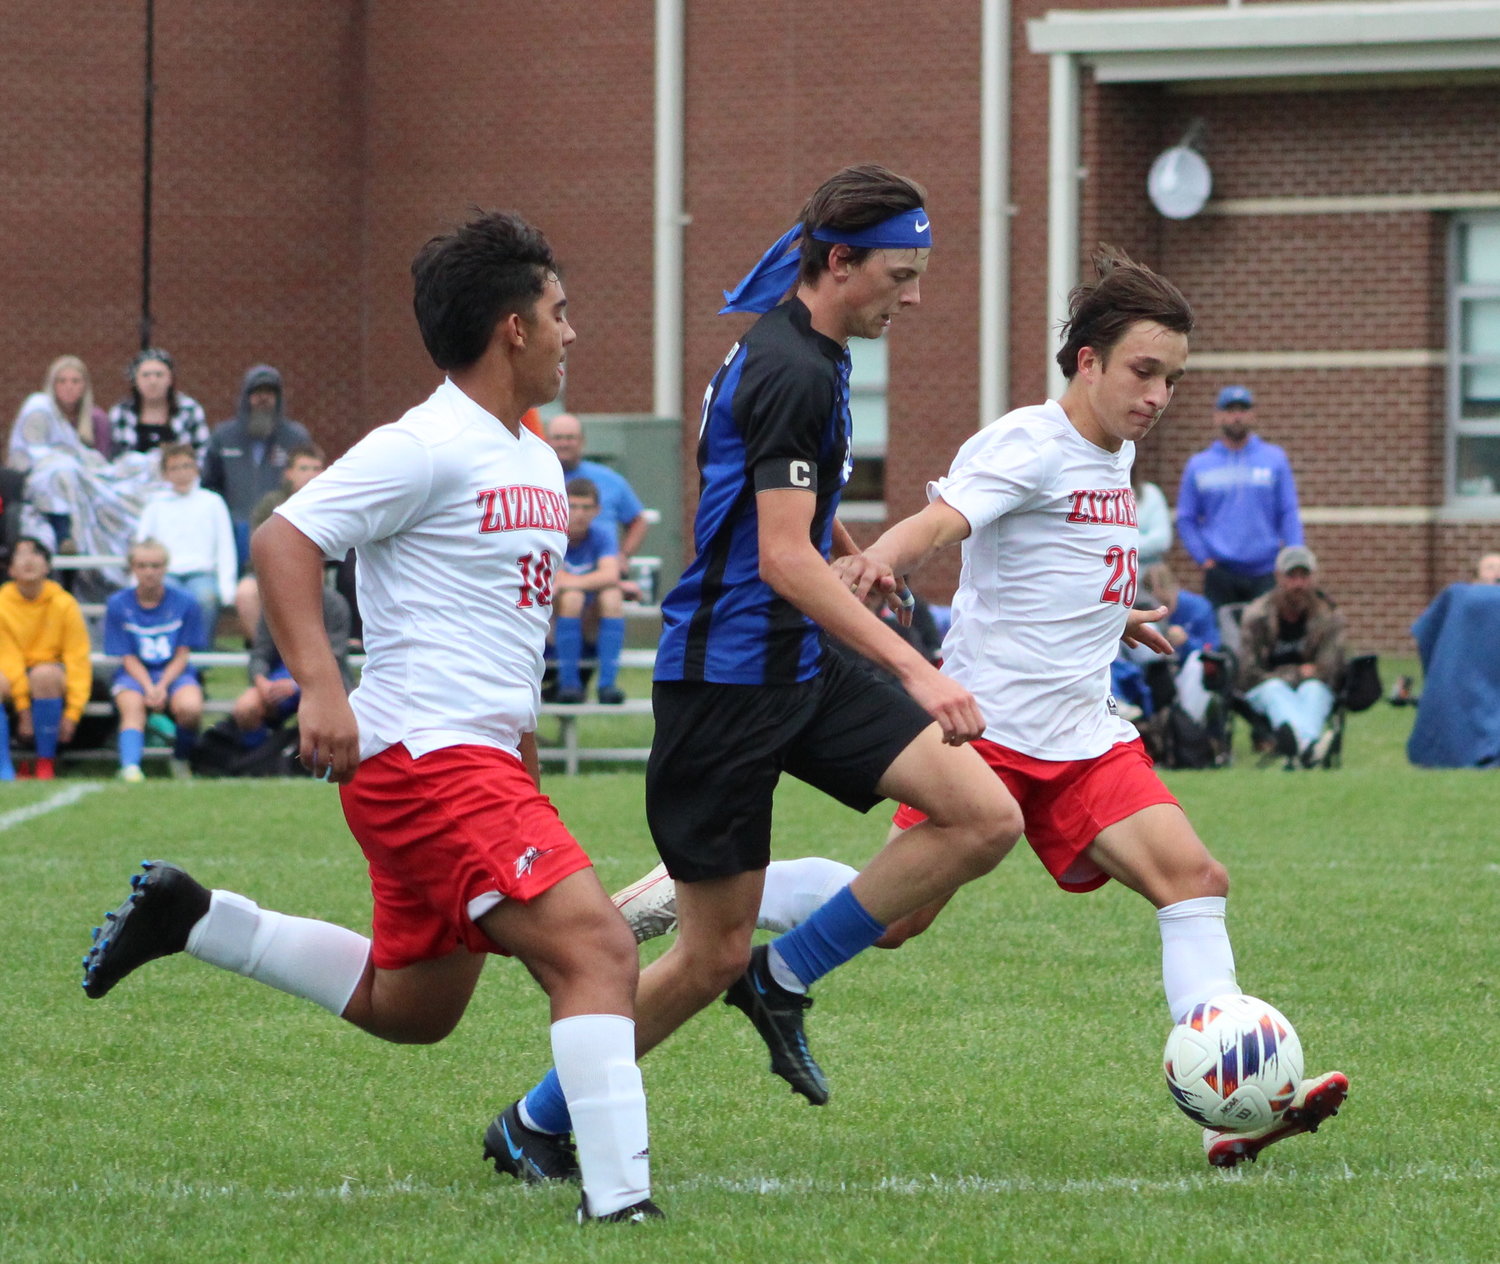 Hoping to score for the Bluejays is Senior #8 Asher Adams as he zips past the West Plains Zizzers.